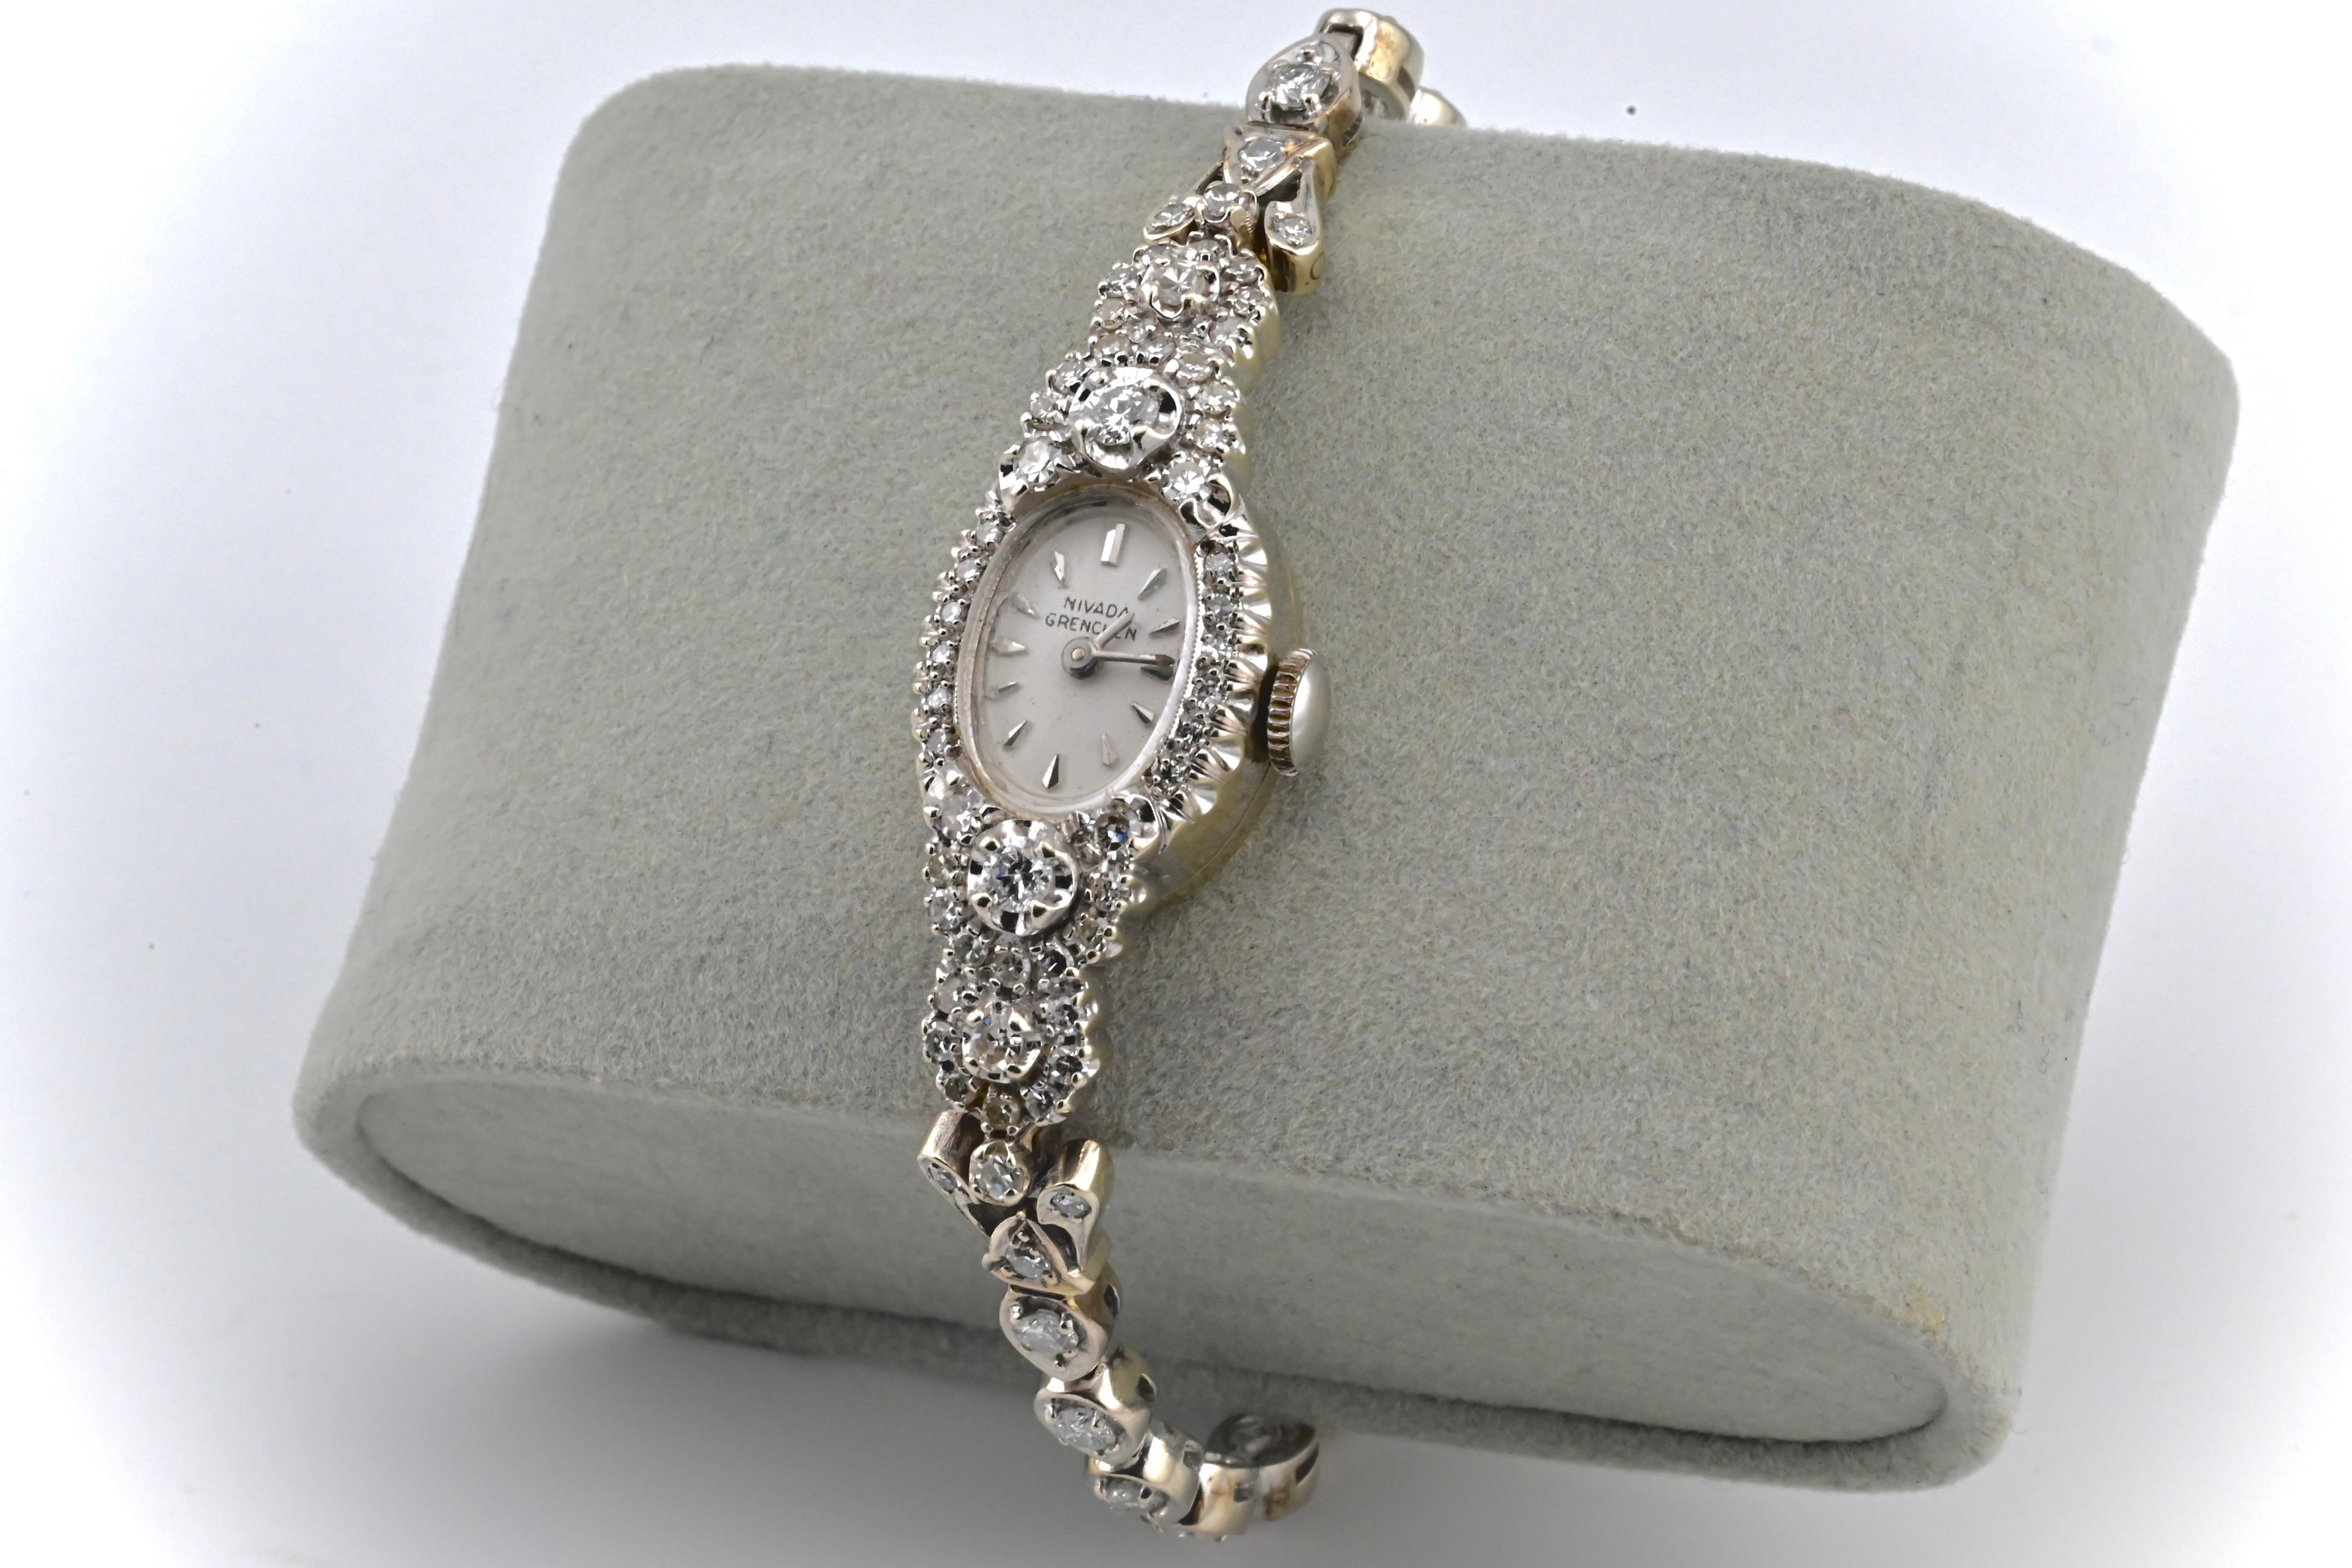 This is an absolutely stunning Nivada Grenchen ladies wristwatch made with 14k white gold & diamonds. This watch has a gorgeous diamond encrusted bezel, and has round cut high quality diamonds going down the strap of the watch. The watch weighs 22